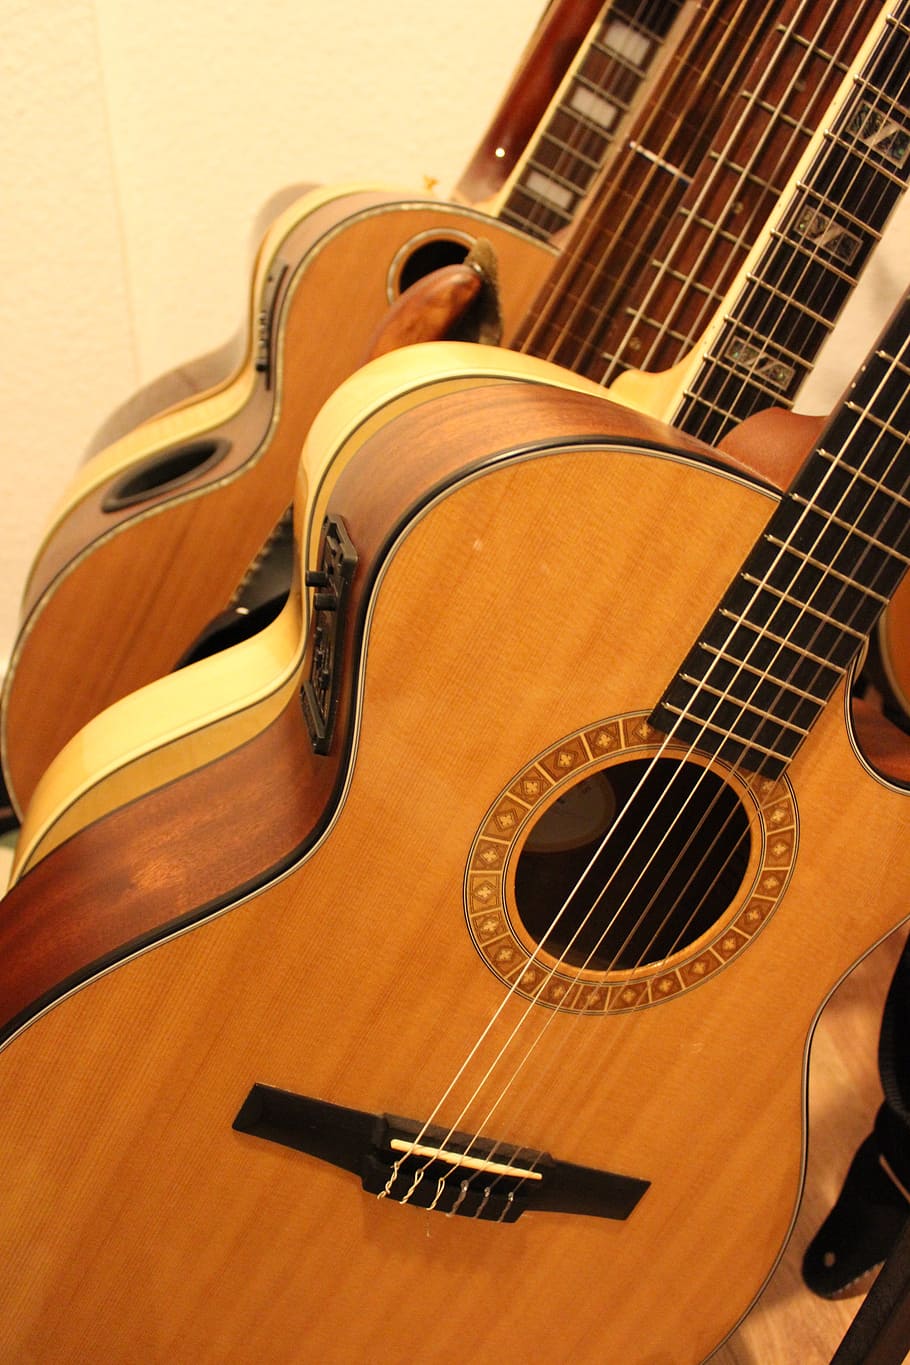 guitars, guitar collection, instrument, acoustic, string instrument